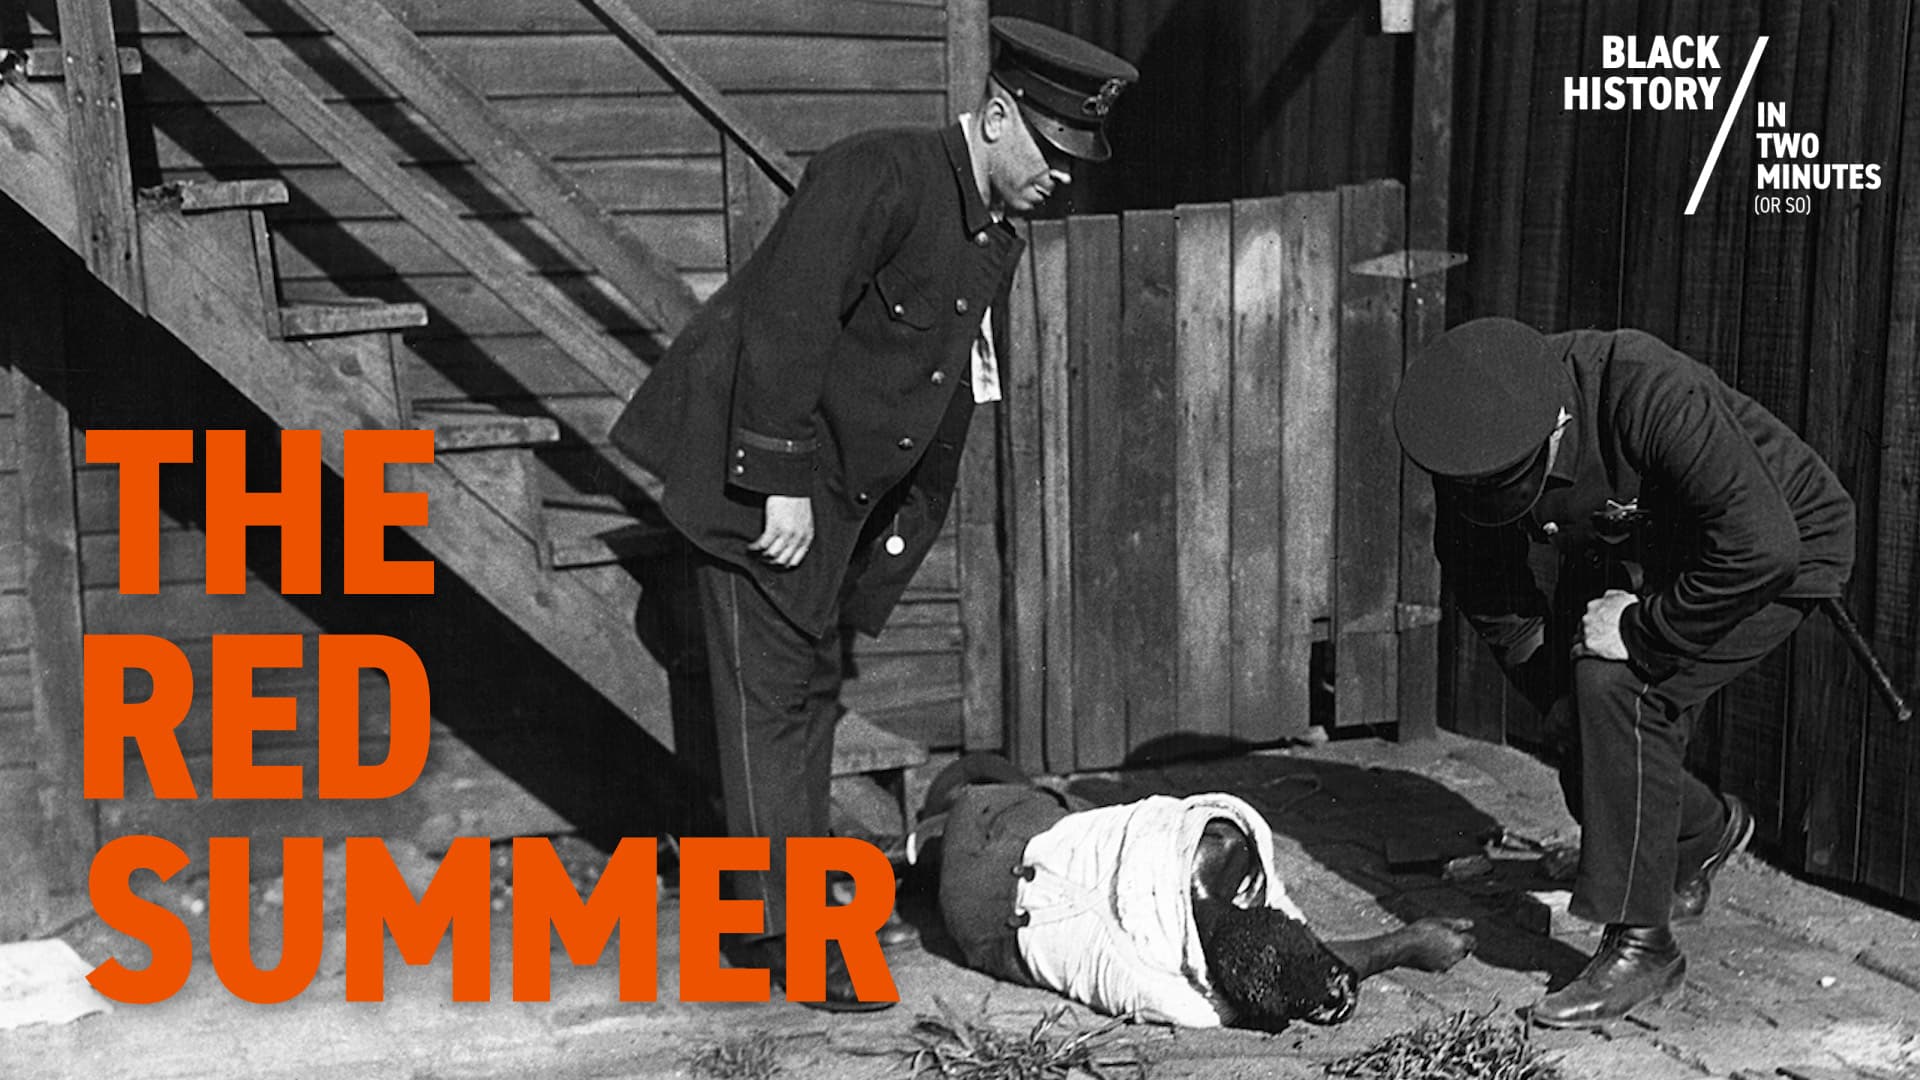 The Red Summer | Black History in Two Minutes (or so)